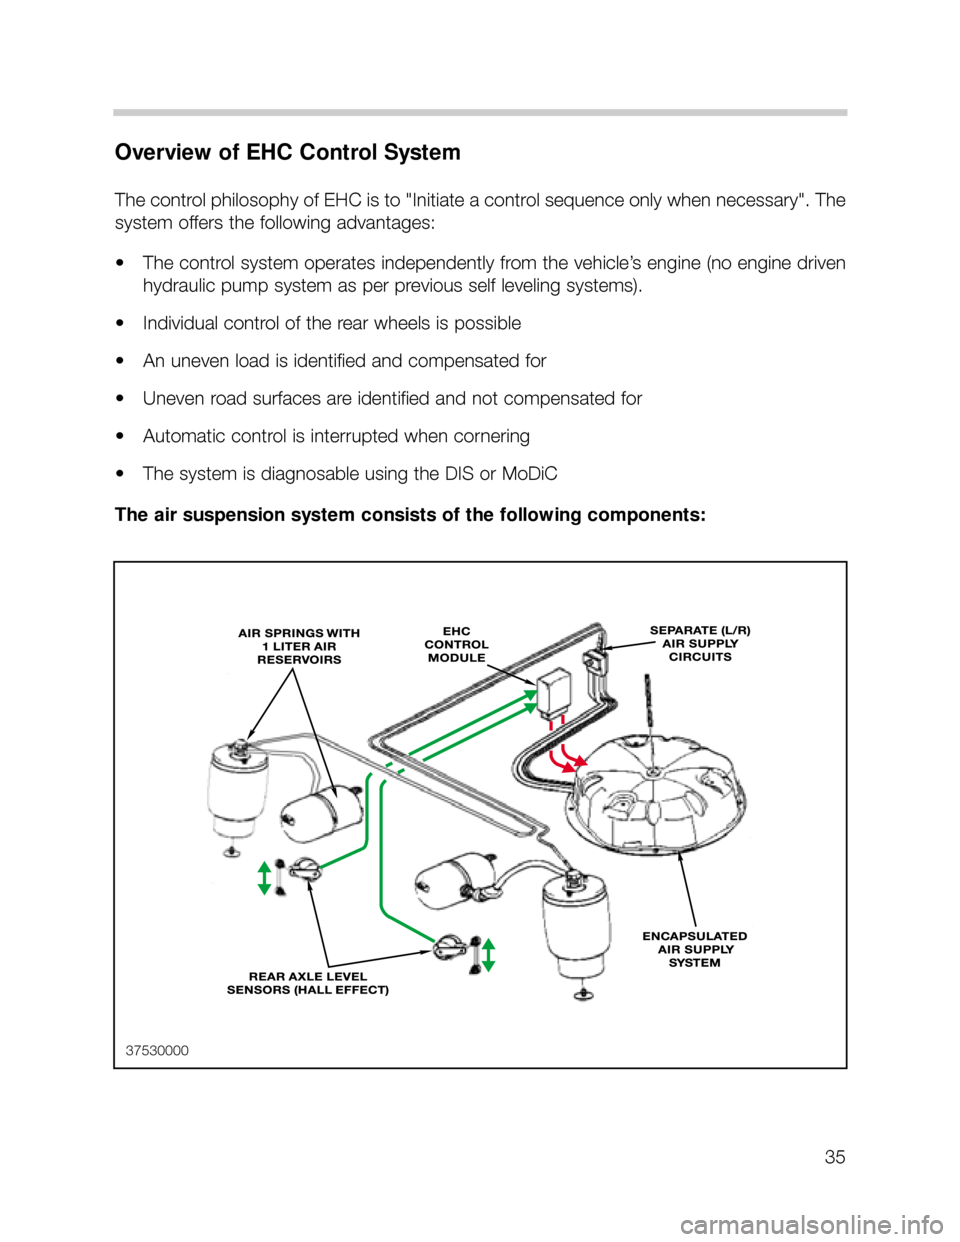 BMW X5 1999 E53 Workshop Manual 35
Overview of EHC Control System
The control philosophy of EHC is to "Initiate a control sequence only when necessary". The
system offers the following advantages:
• The control system operates ind